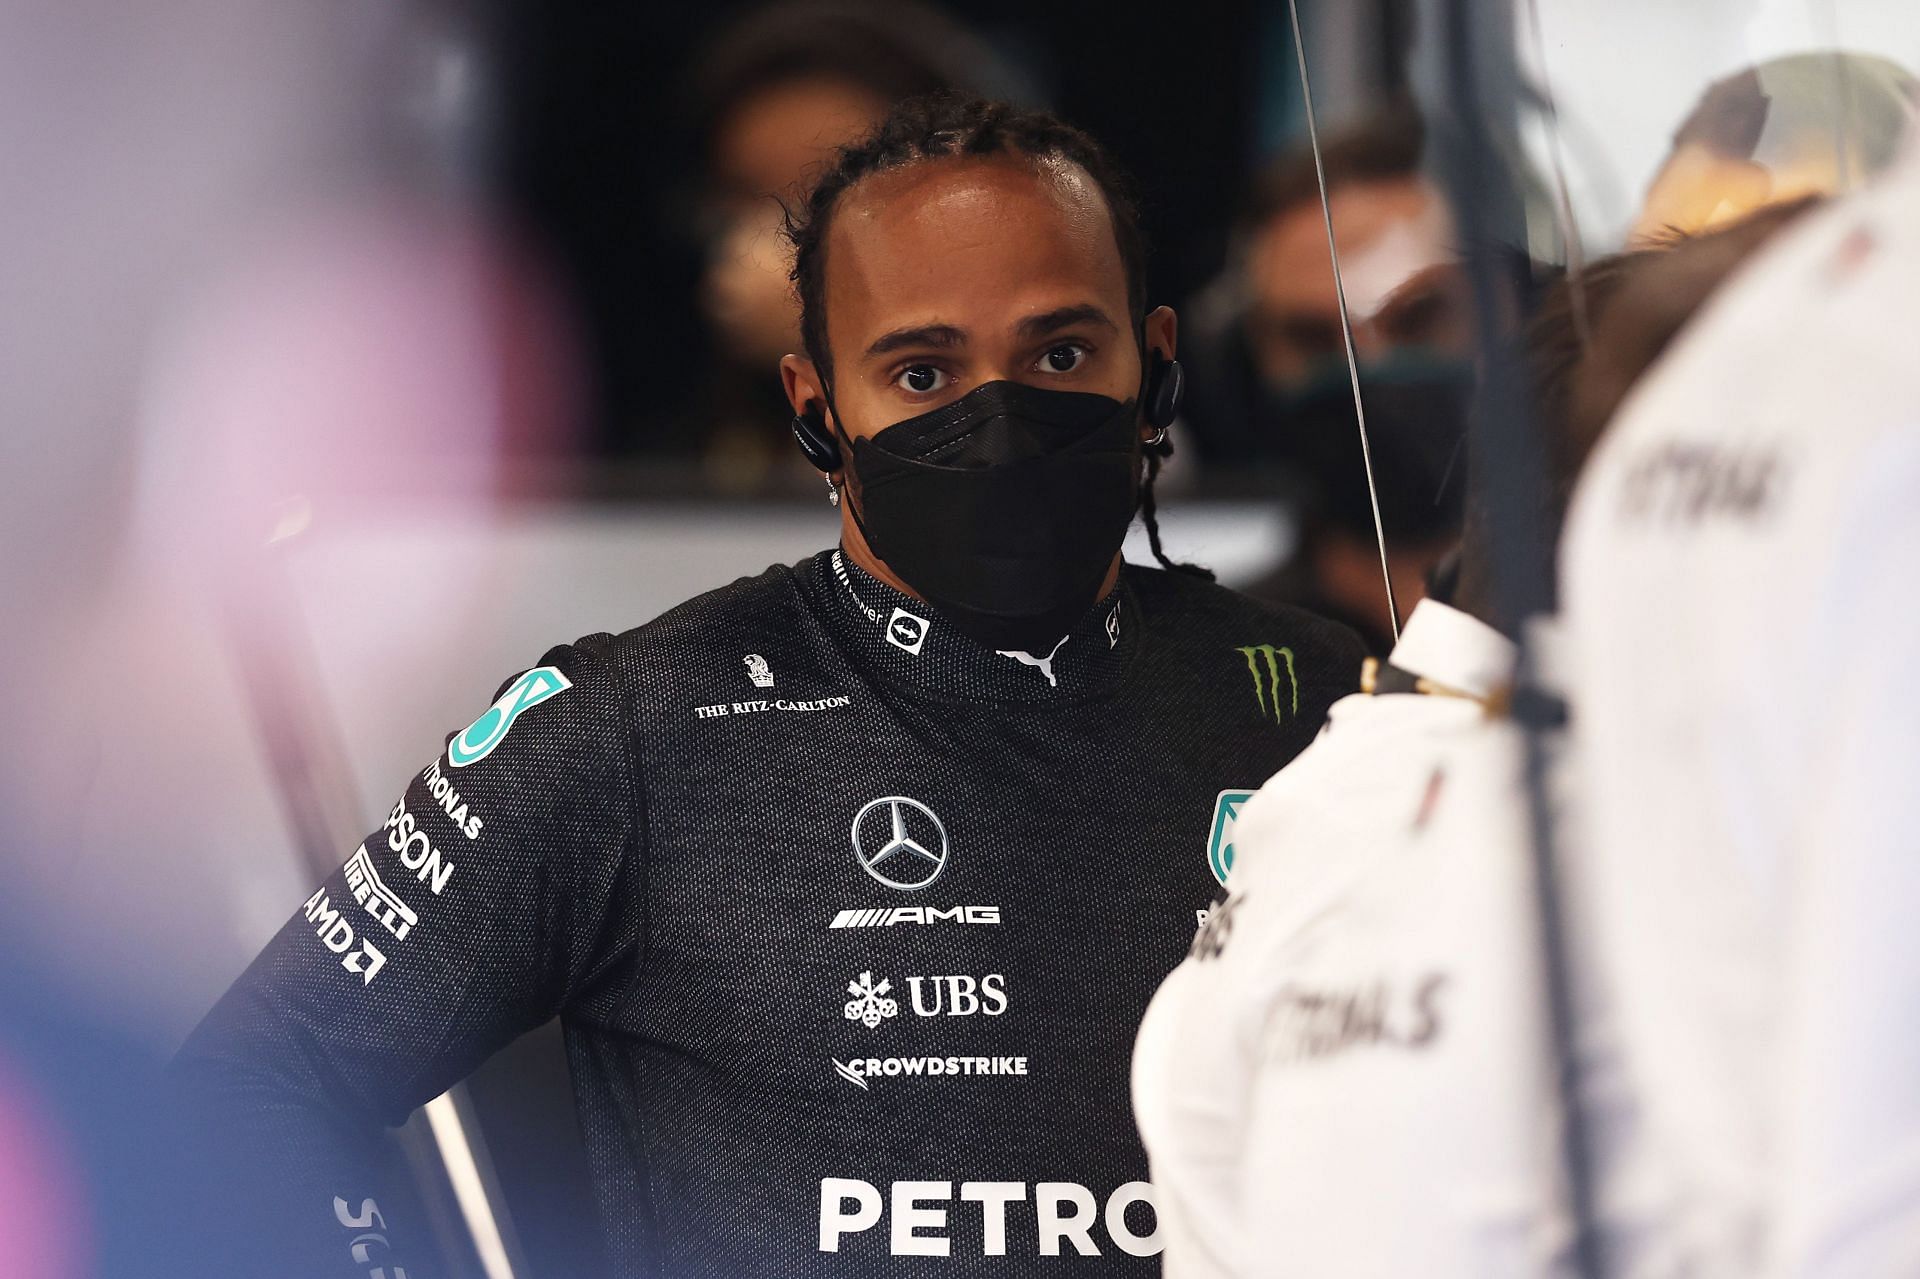 Lewis Hamilton has been disqualified from the Brazil Grand Prix sprint. (Photo by Lars Baron/Getty Images)